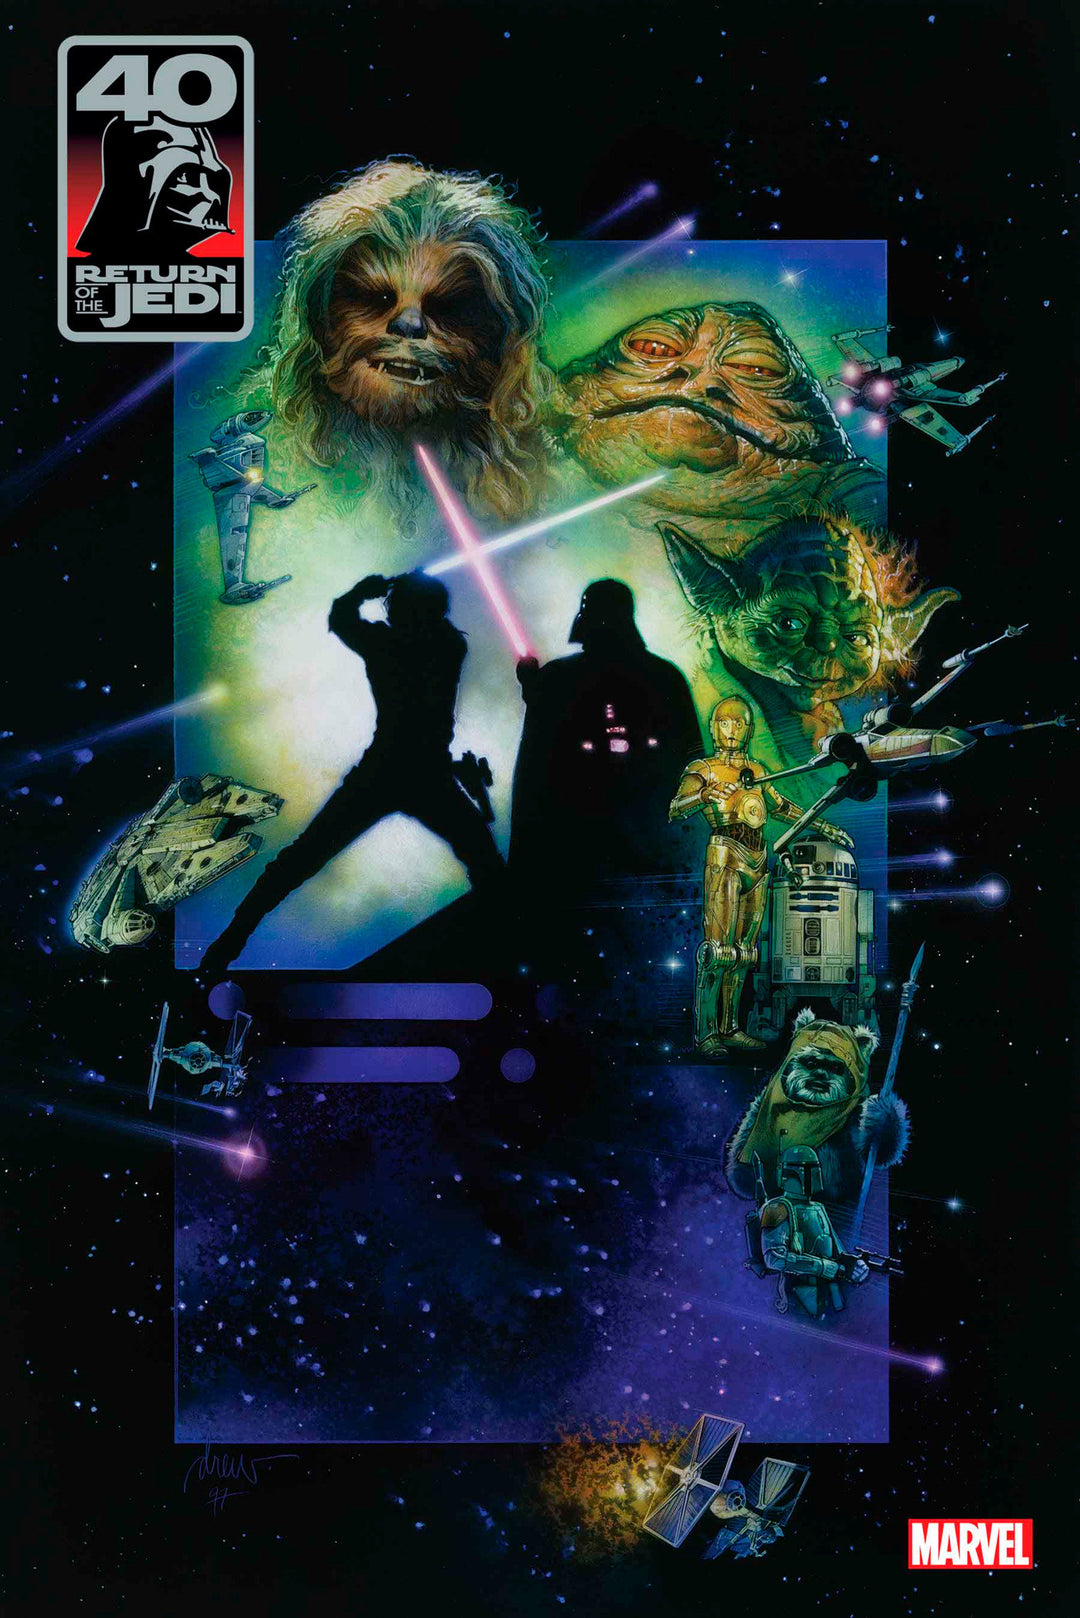 Star Wars: Return Of The Jedi - The 40th Anniversary Covers By Chris Sprouse 1 Movie Poster Variant